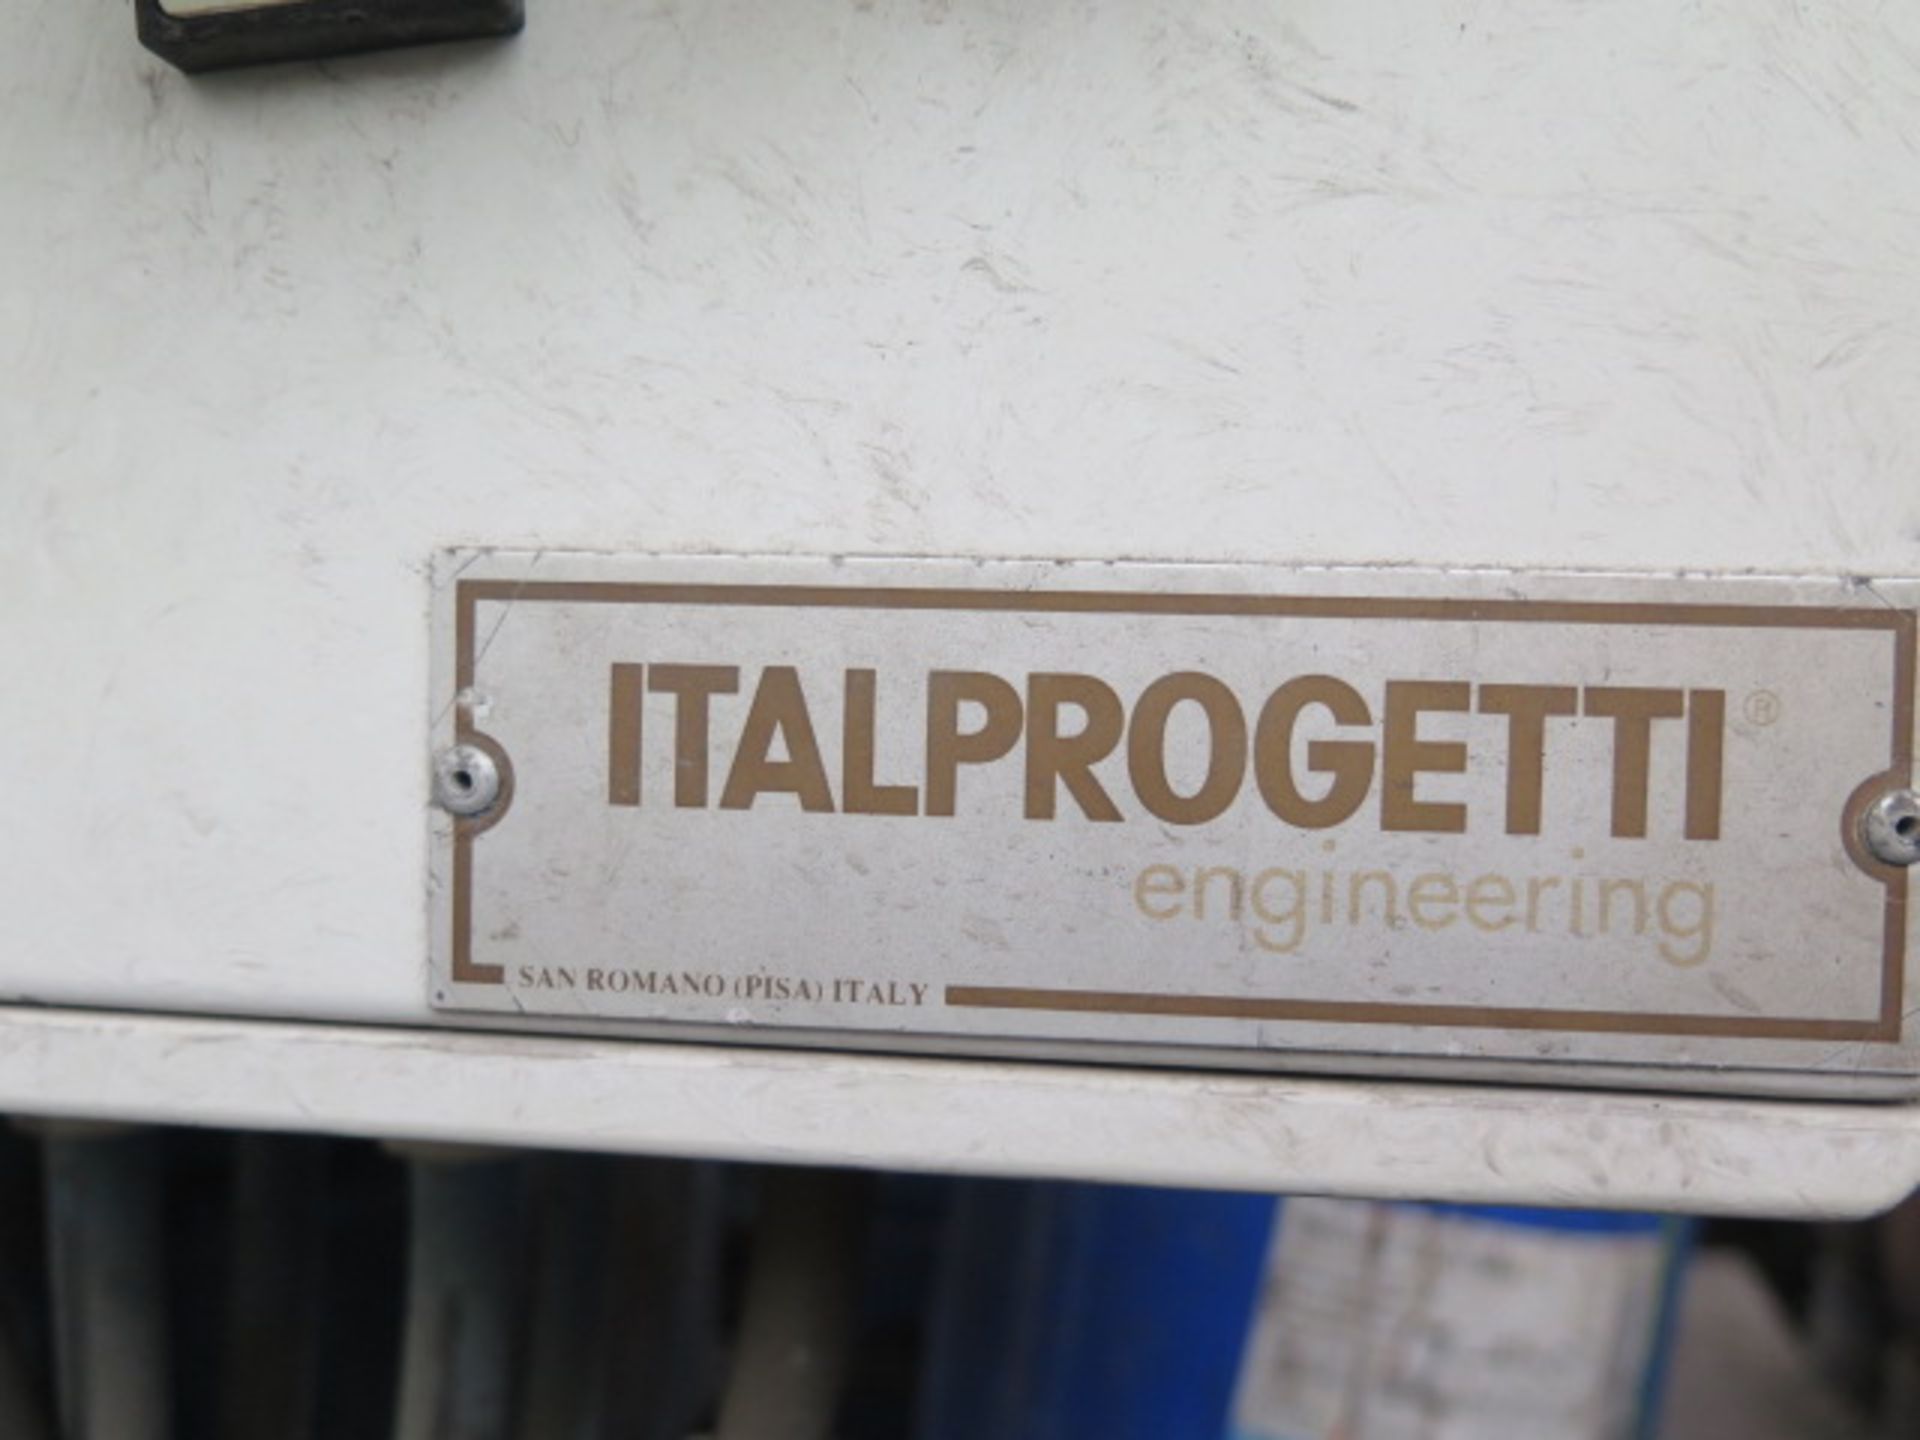 Italprogetti High Volume Liquid Filtration System w/ Halprogetti 63-Elemant Filter Press (SOLD AS-IS - Image 10 of 11